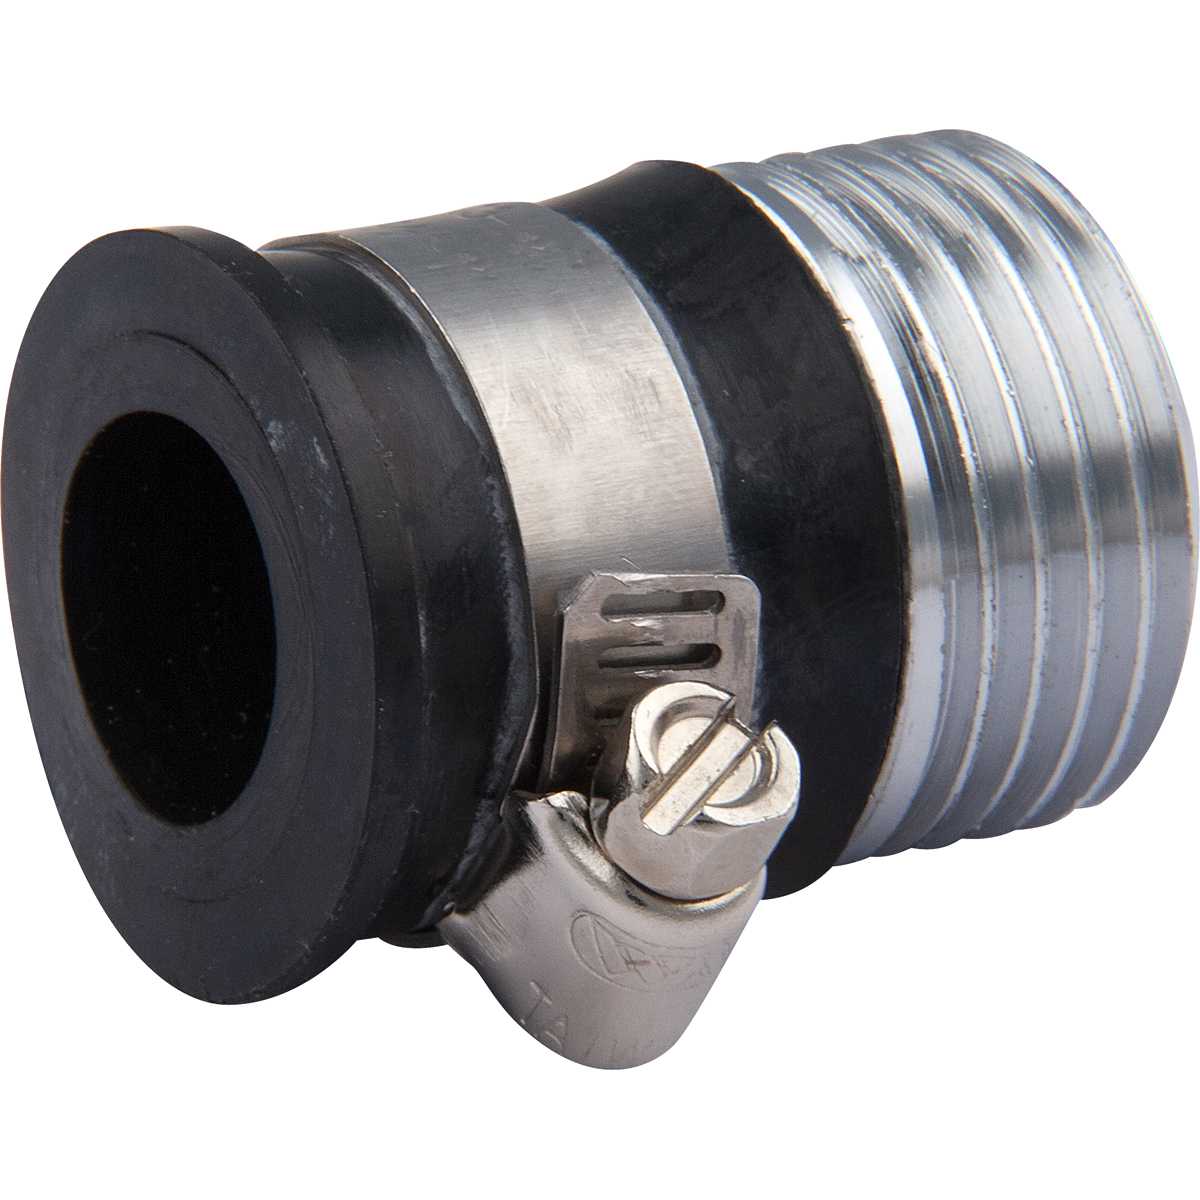 universal faucet adapter for hose